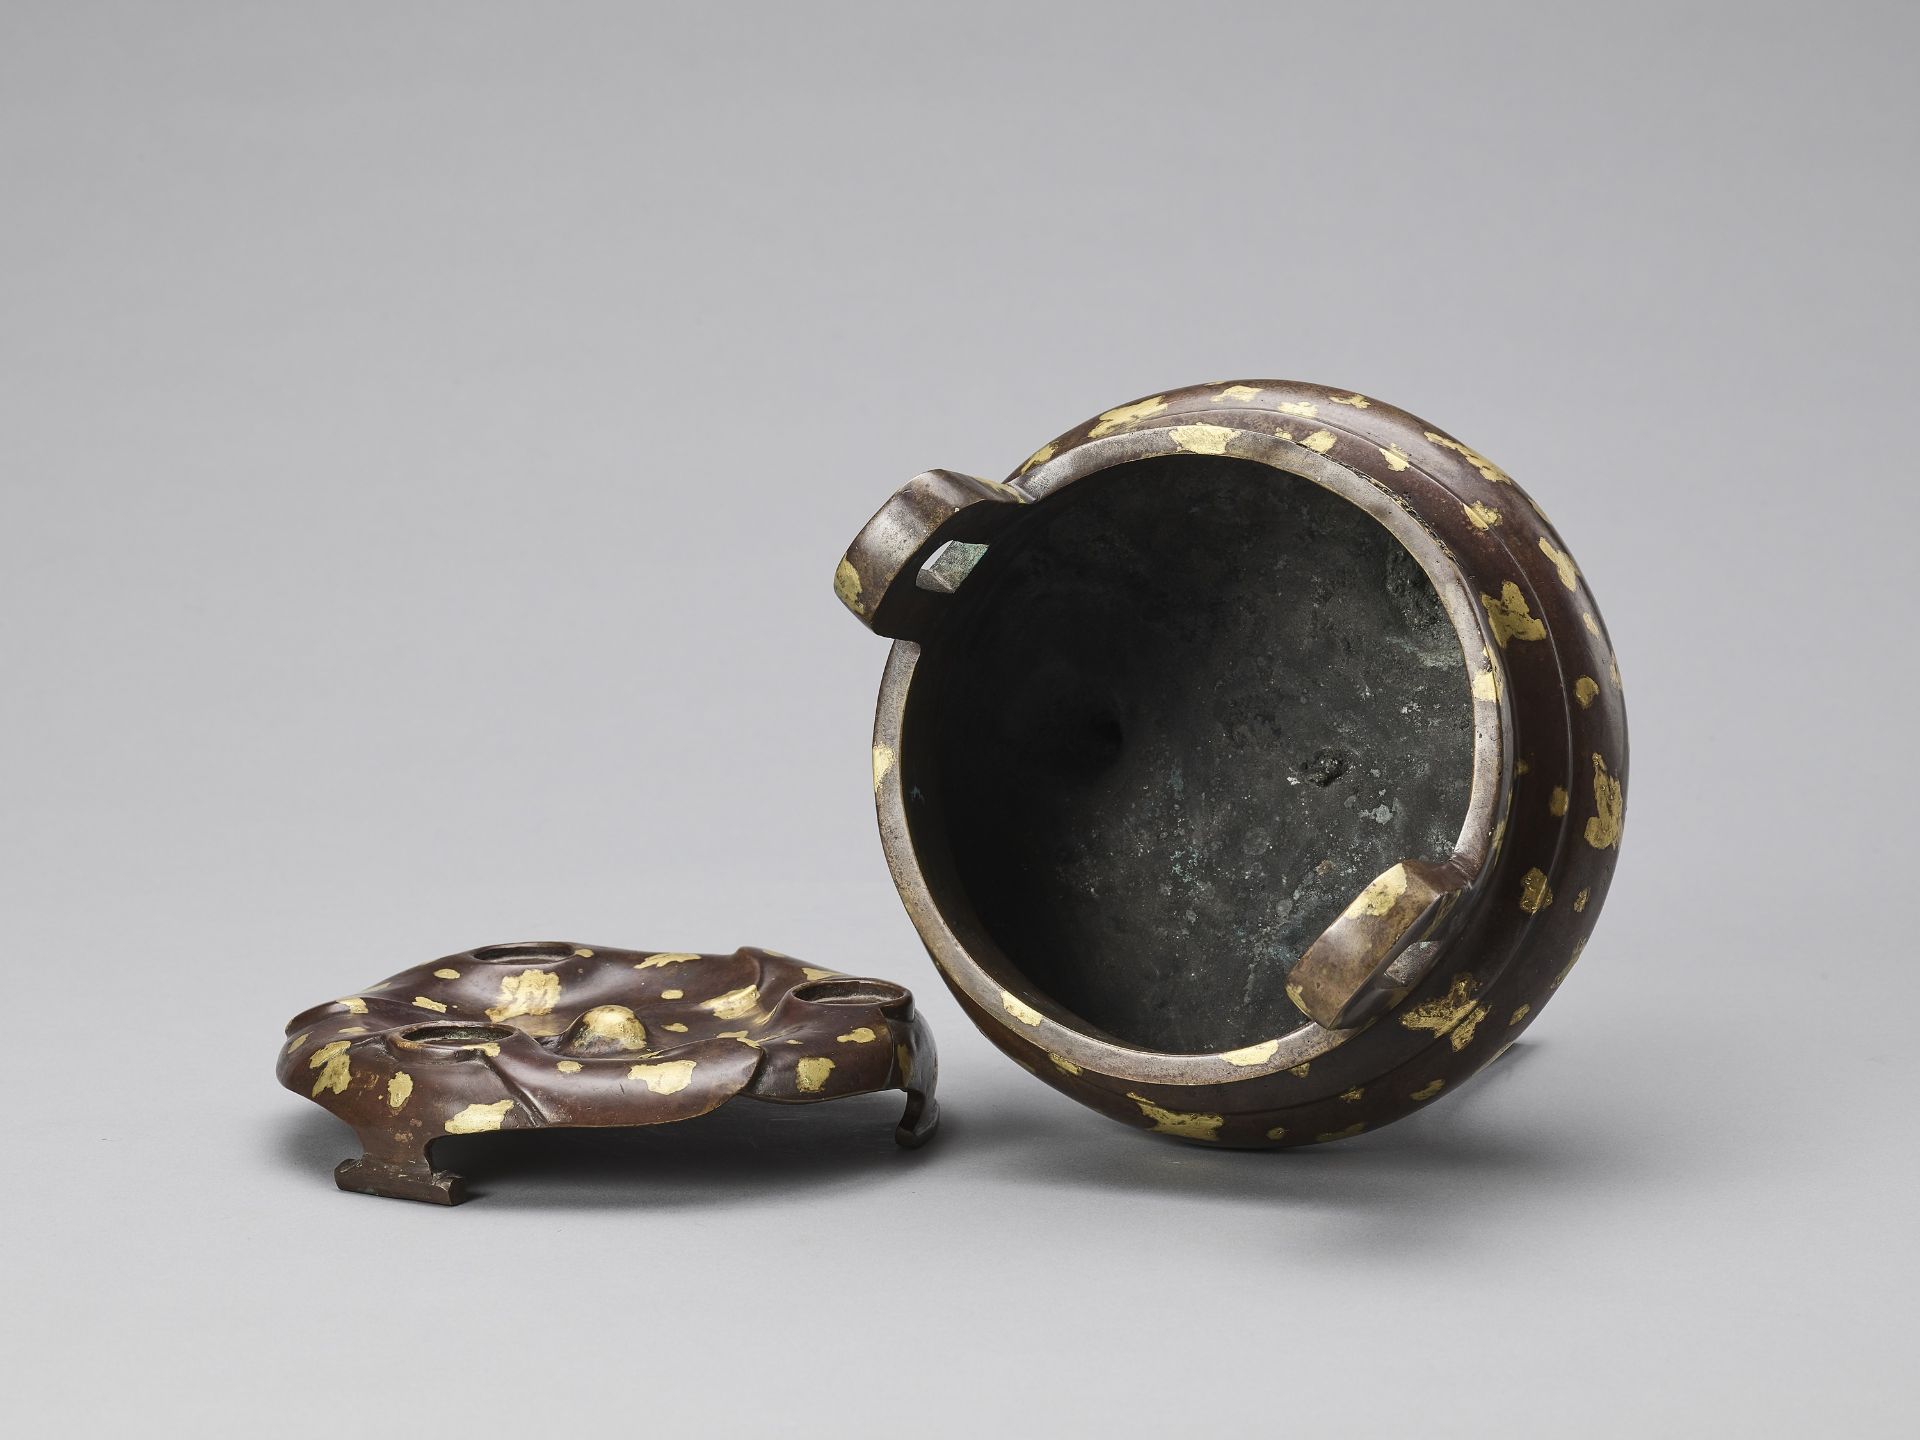 A GOLD-SPLASHED BRONZE TRIPOD CENSER WITH SIX-CHARACTER XUANDE MARK, QING - Image 7 of 8